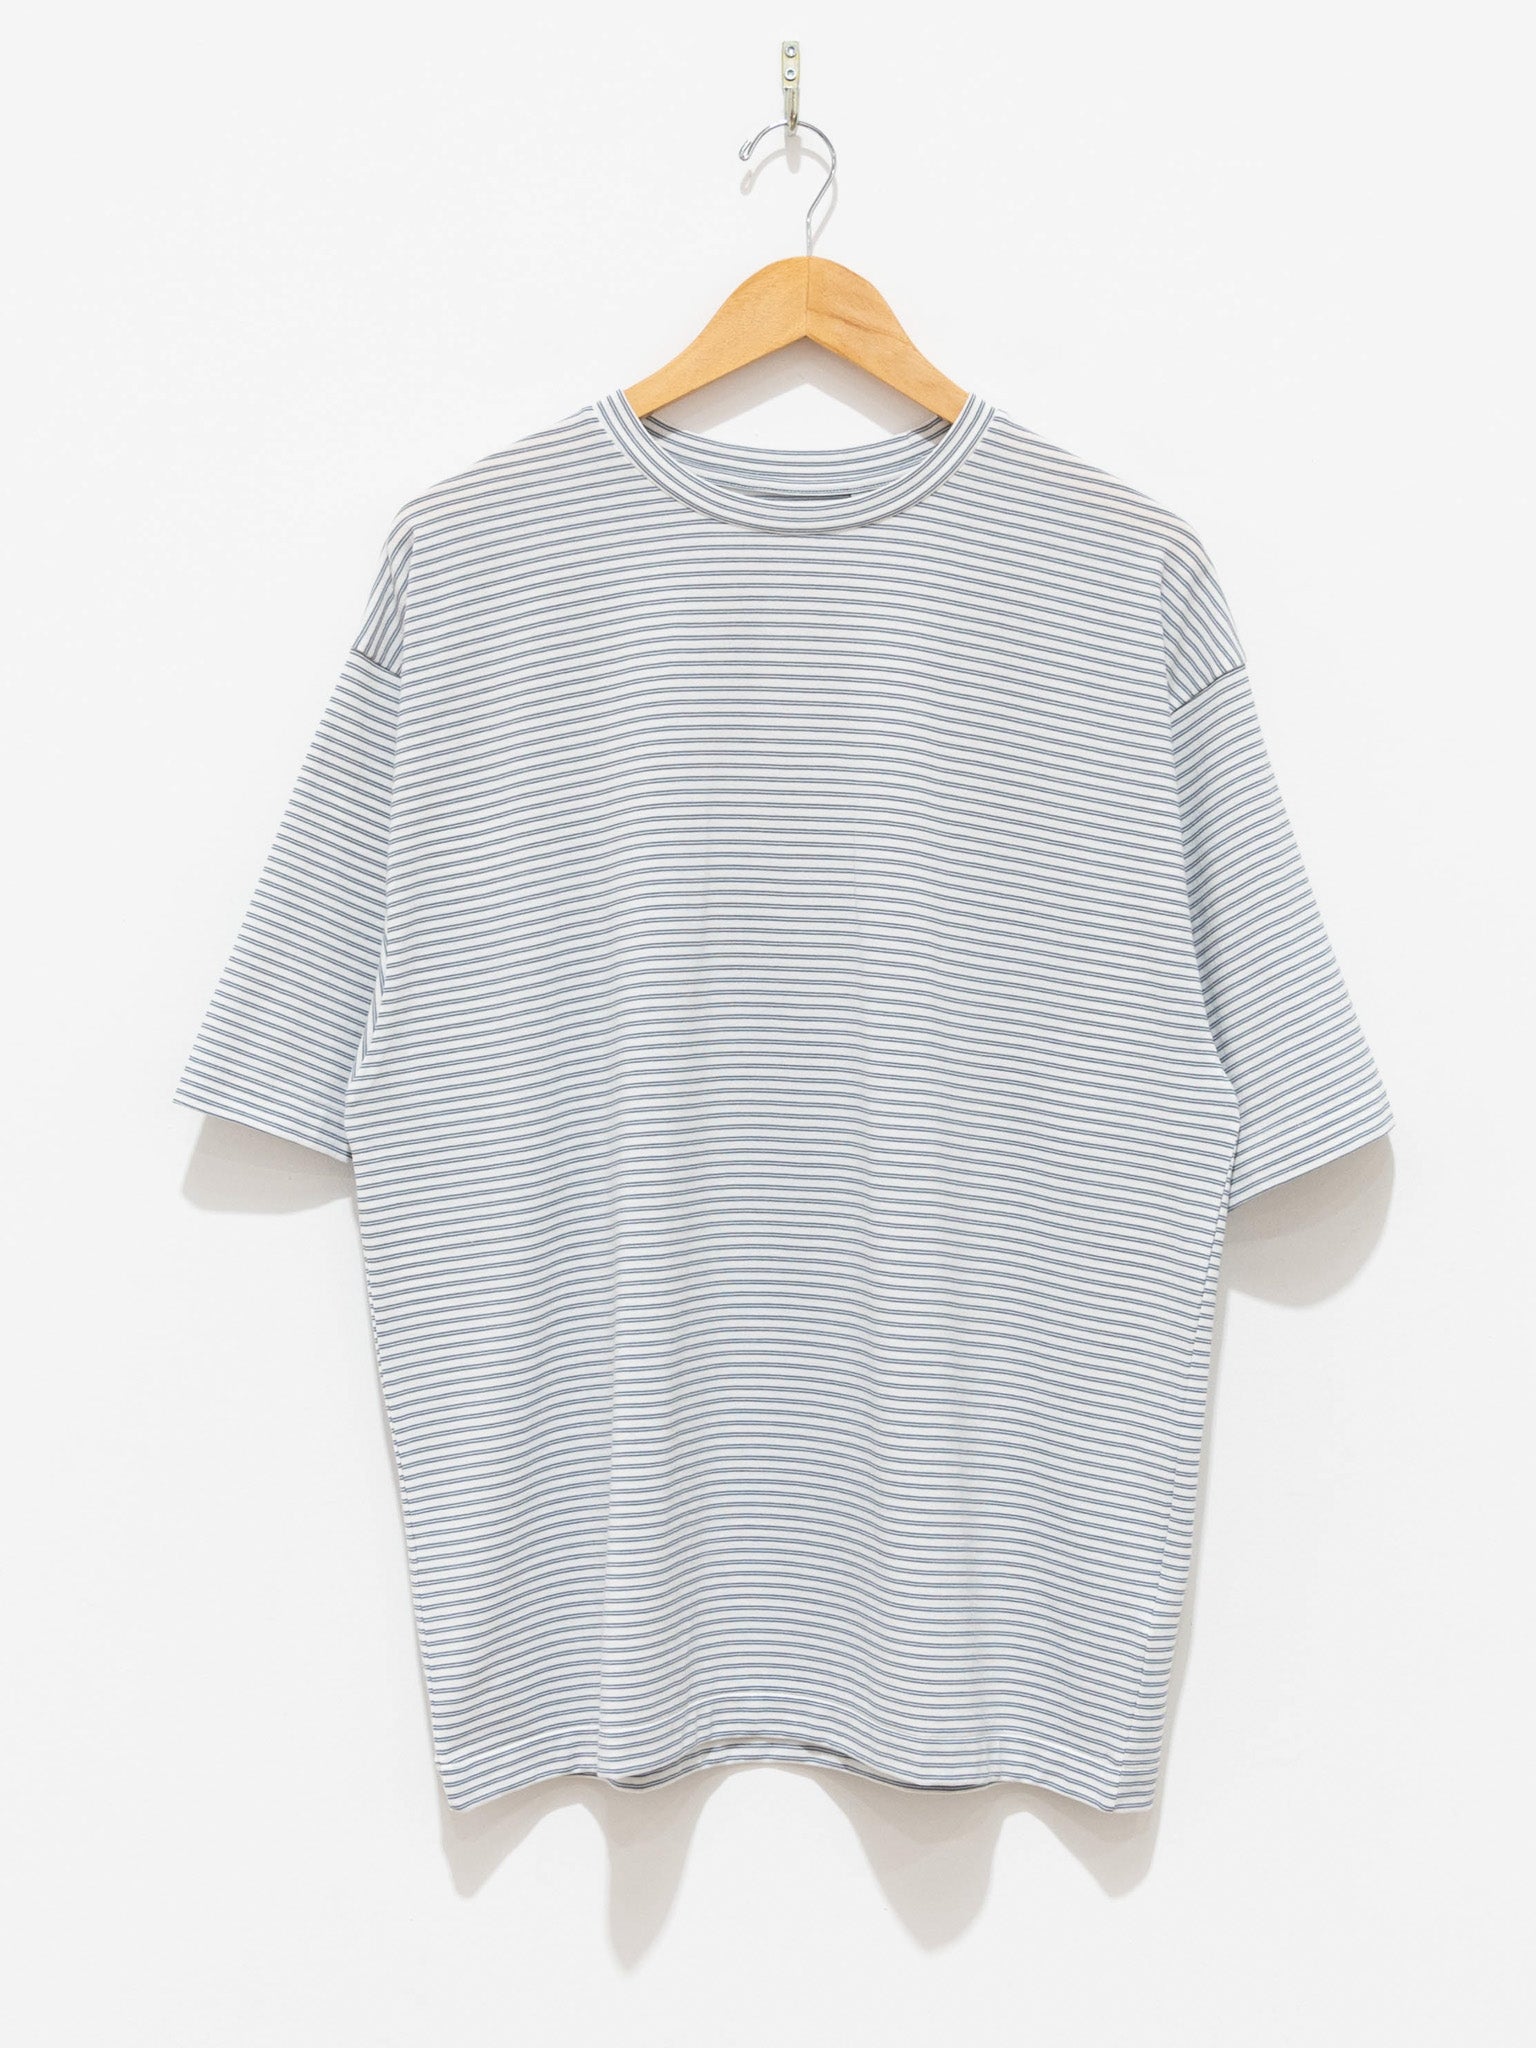 Hard Twisted Border Jersey S/S Tee - White Border